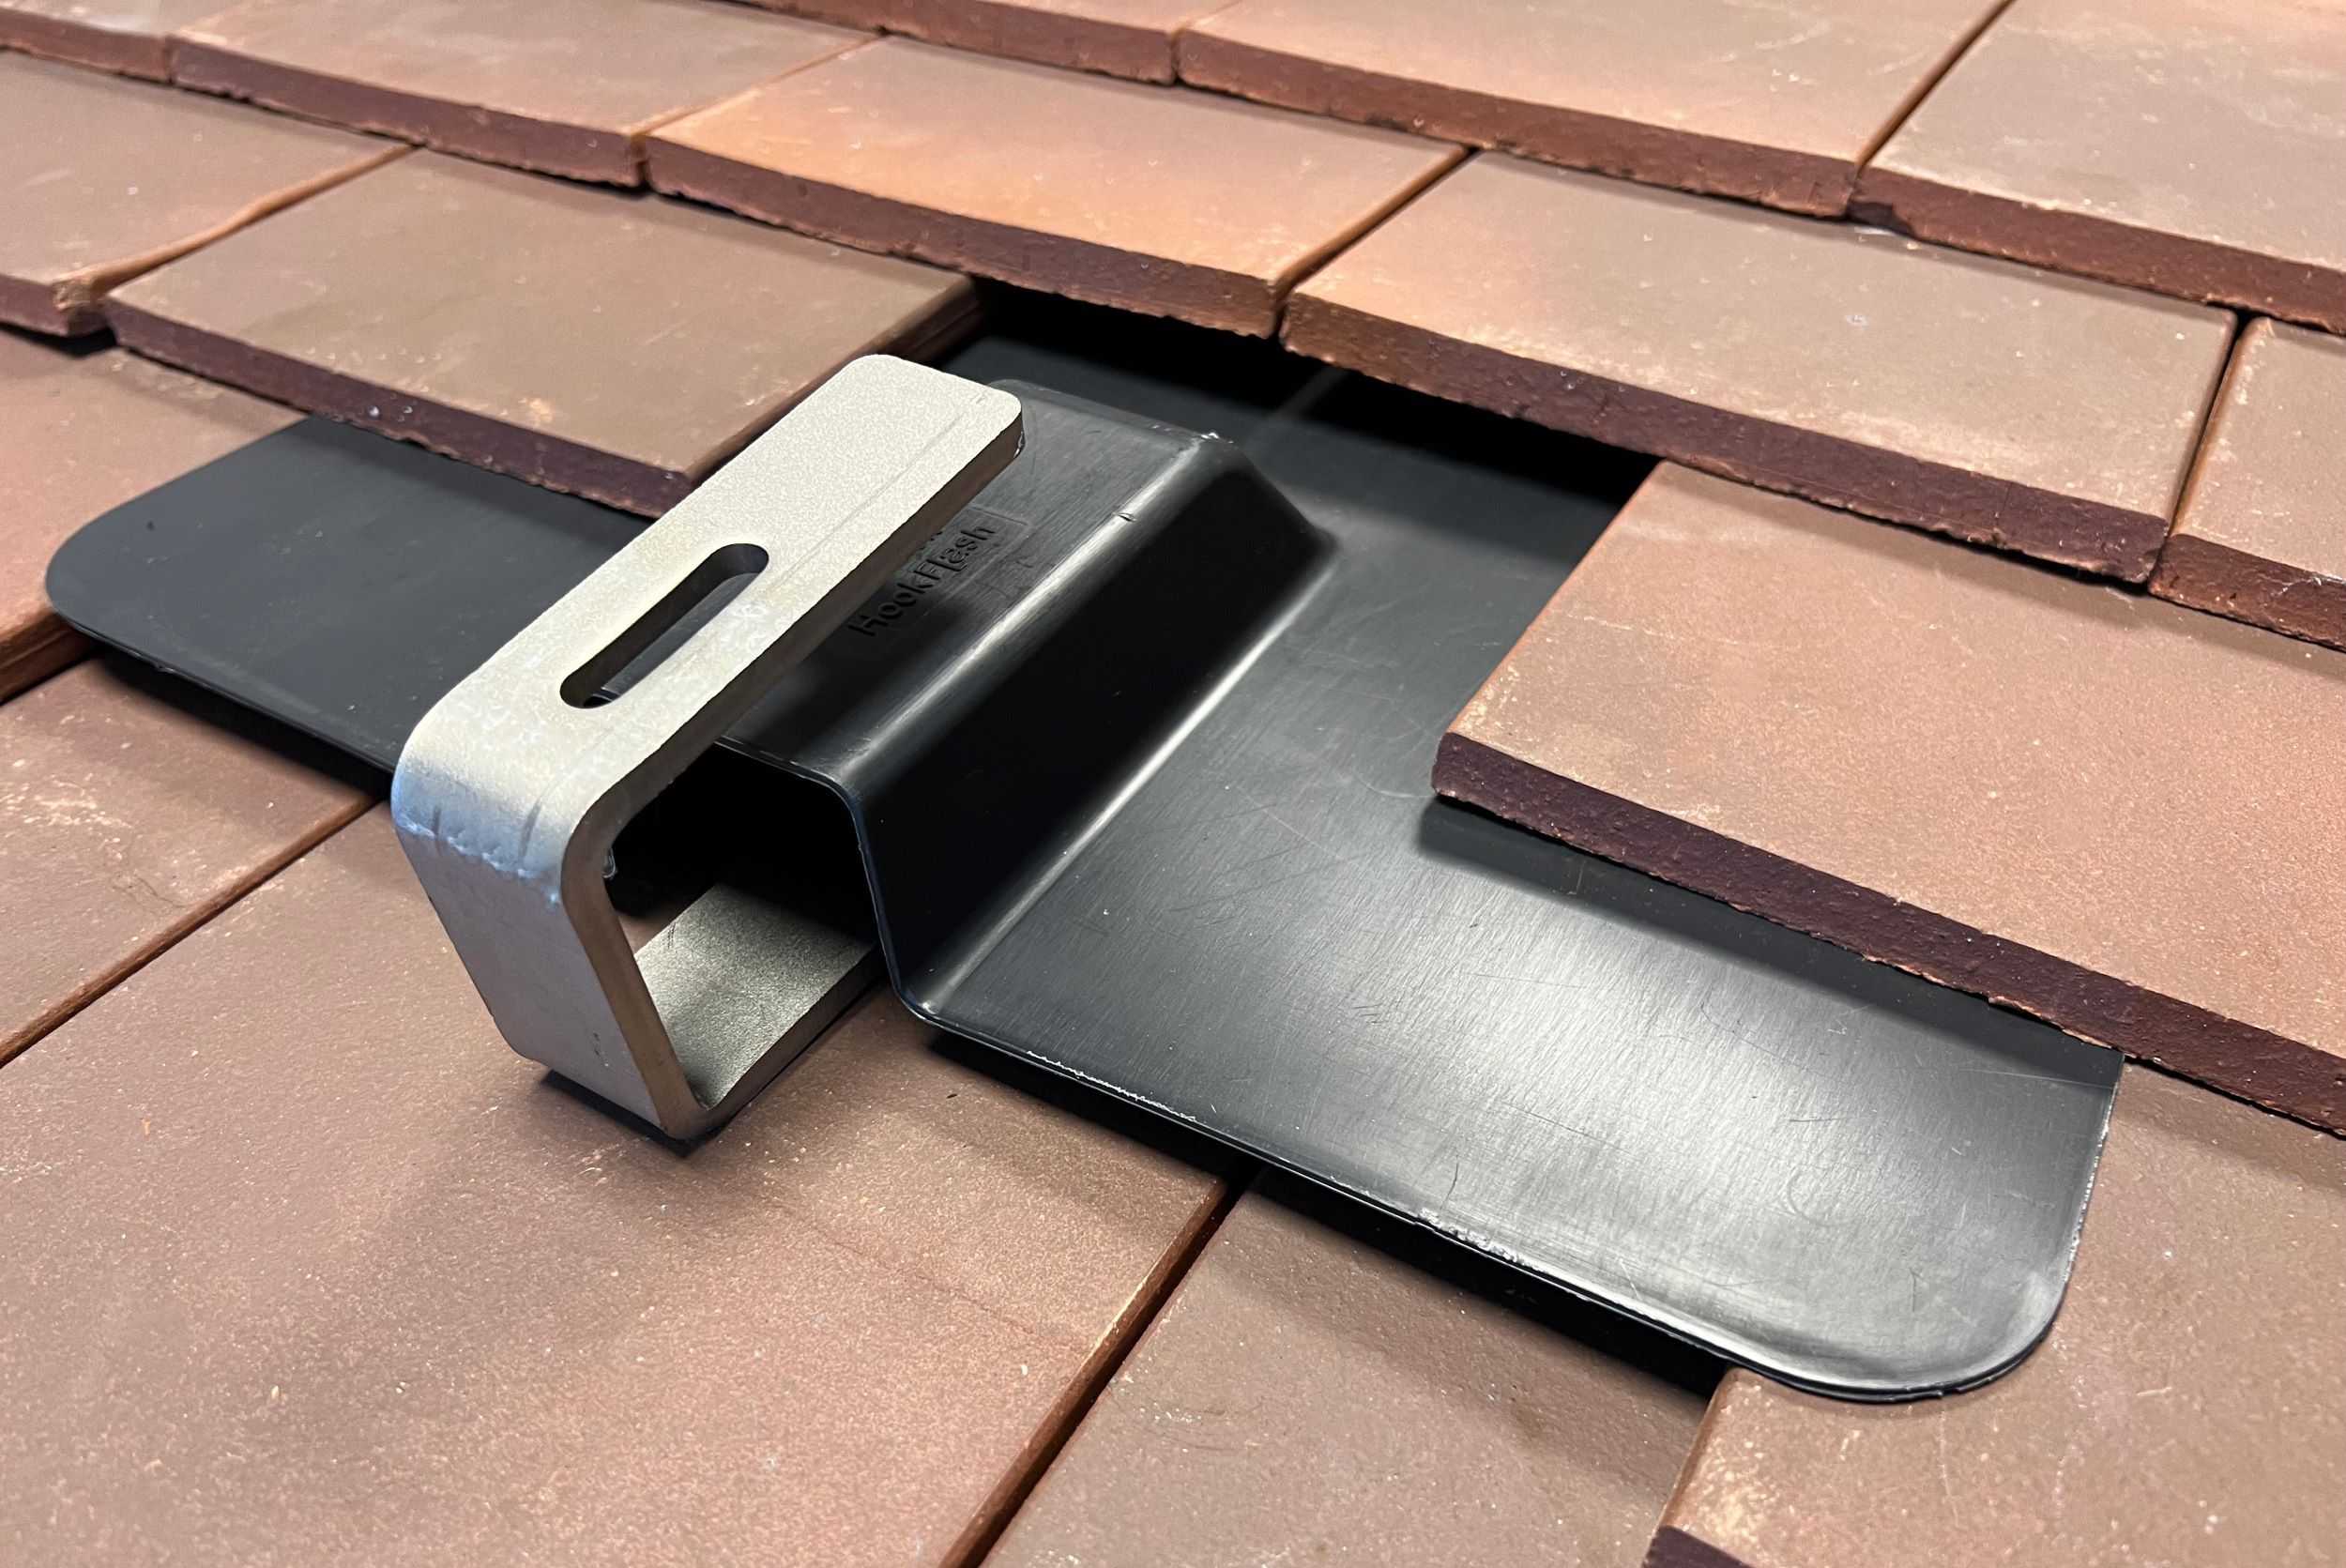 PBM speaks with Ollie Janes, MD of the DEKS EMEA division, about the firm’s latest innovations and merchant support offer in the drainage, roof flashing and solar accessories product categories.